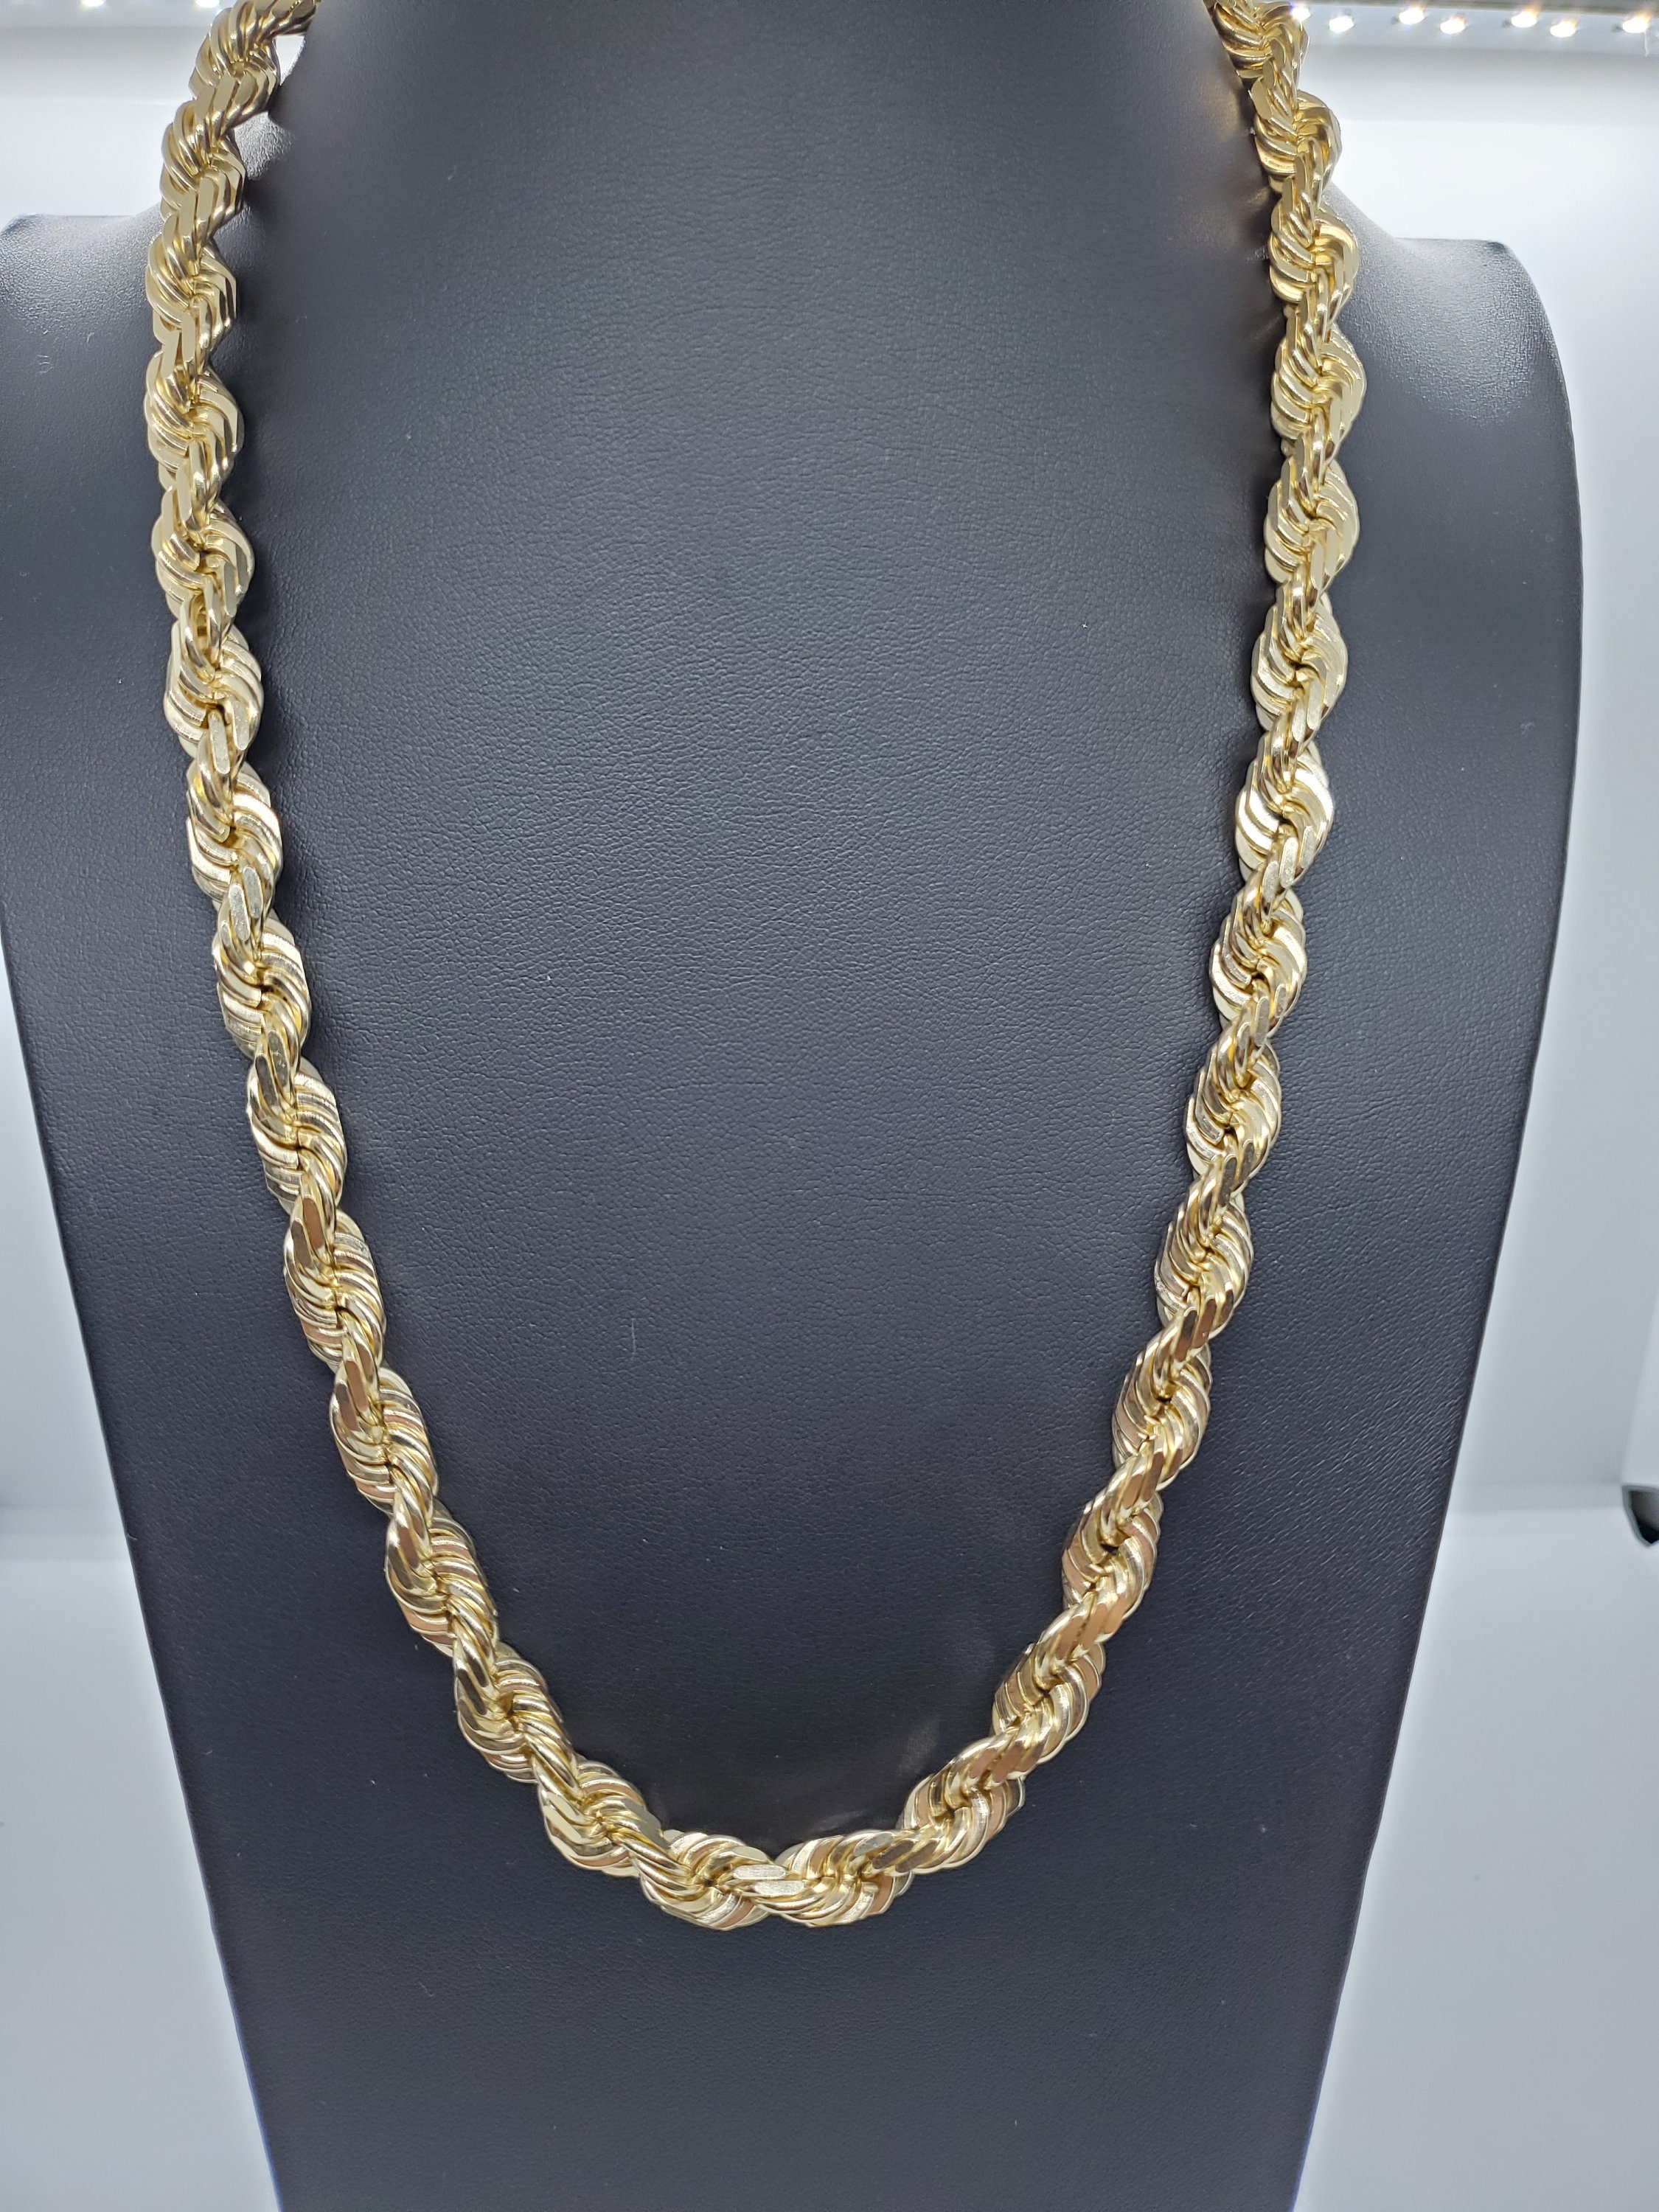 Cheapest Price in the USA Brand New 14K SOLID 10MM GOLD Rope Chain 24-30  Grand Opening Special With Free Gift 